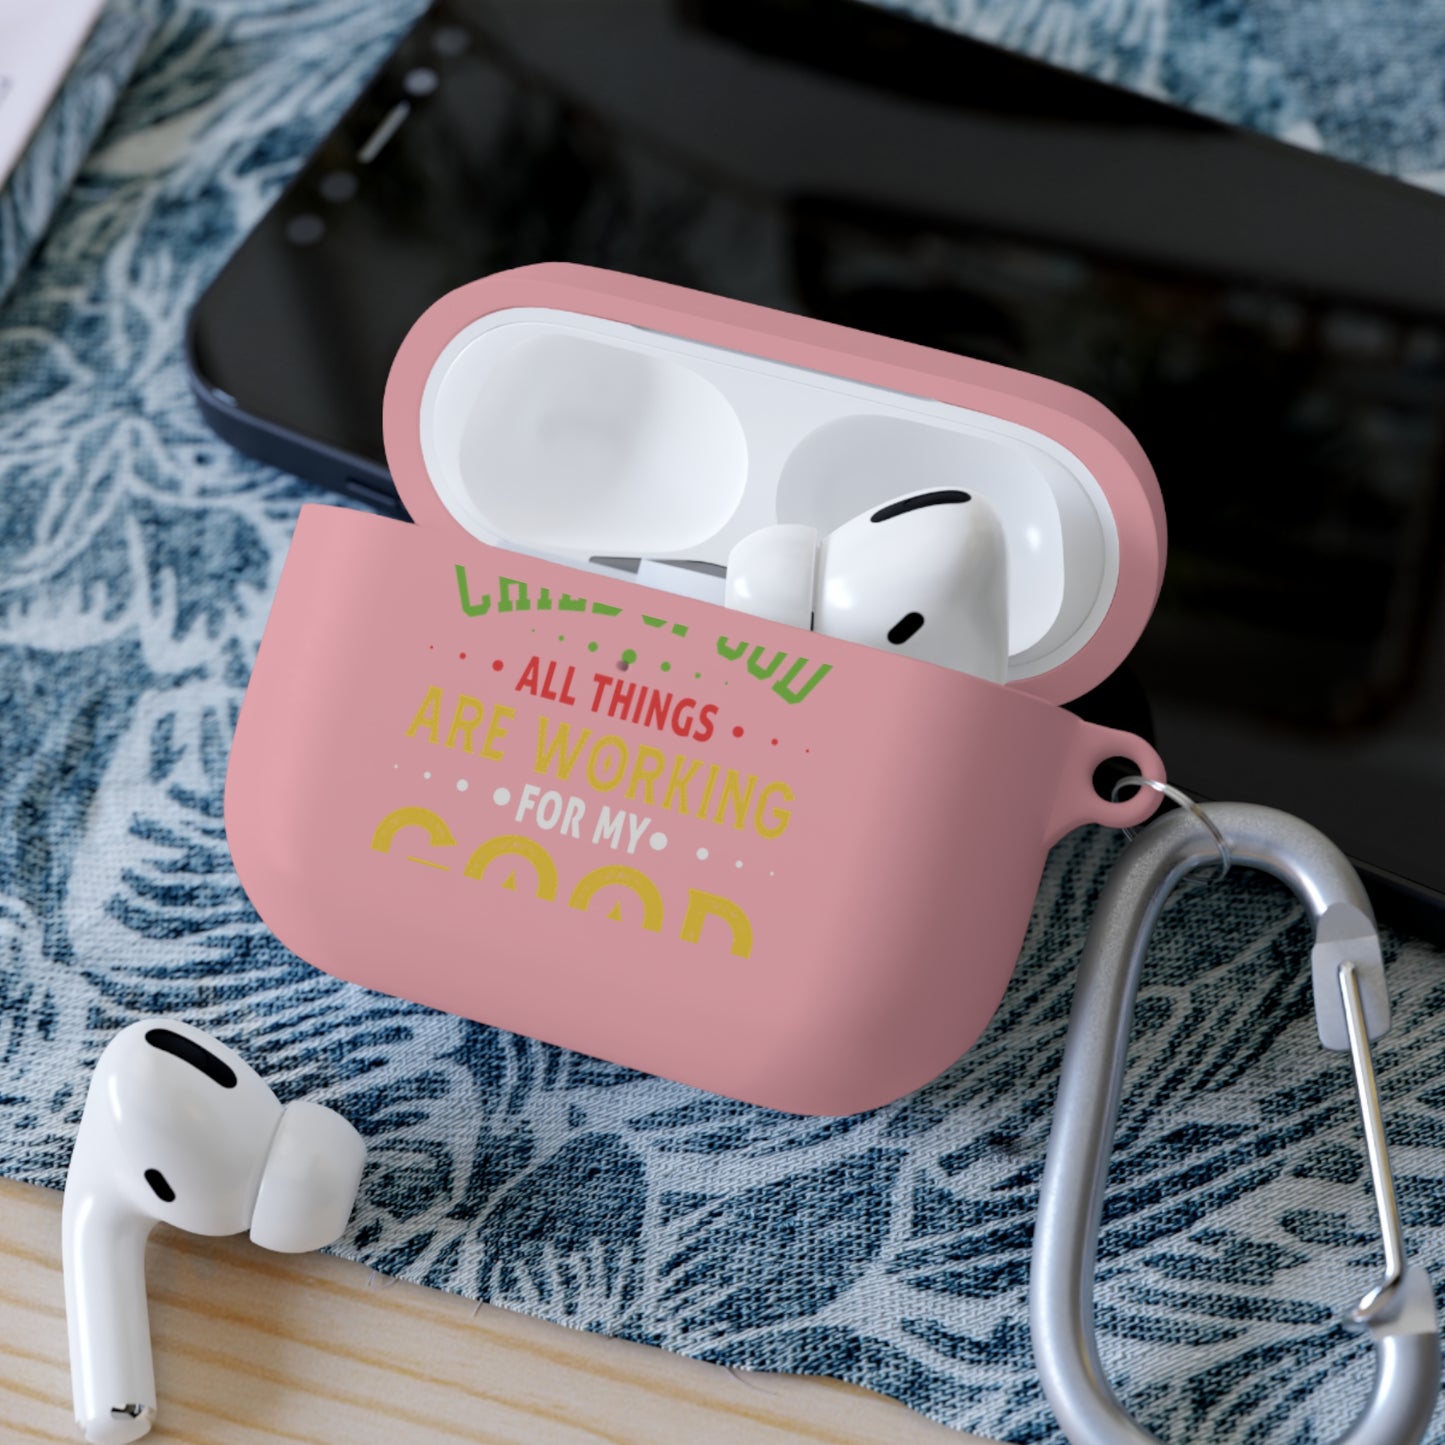 Child Of God All Things Are Working For My Good Christian Airpod / Airpods Pro Case cover Printify